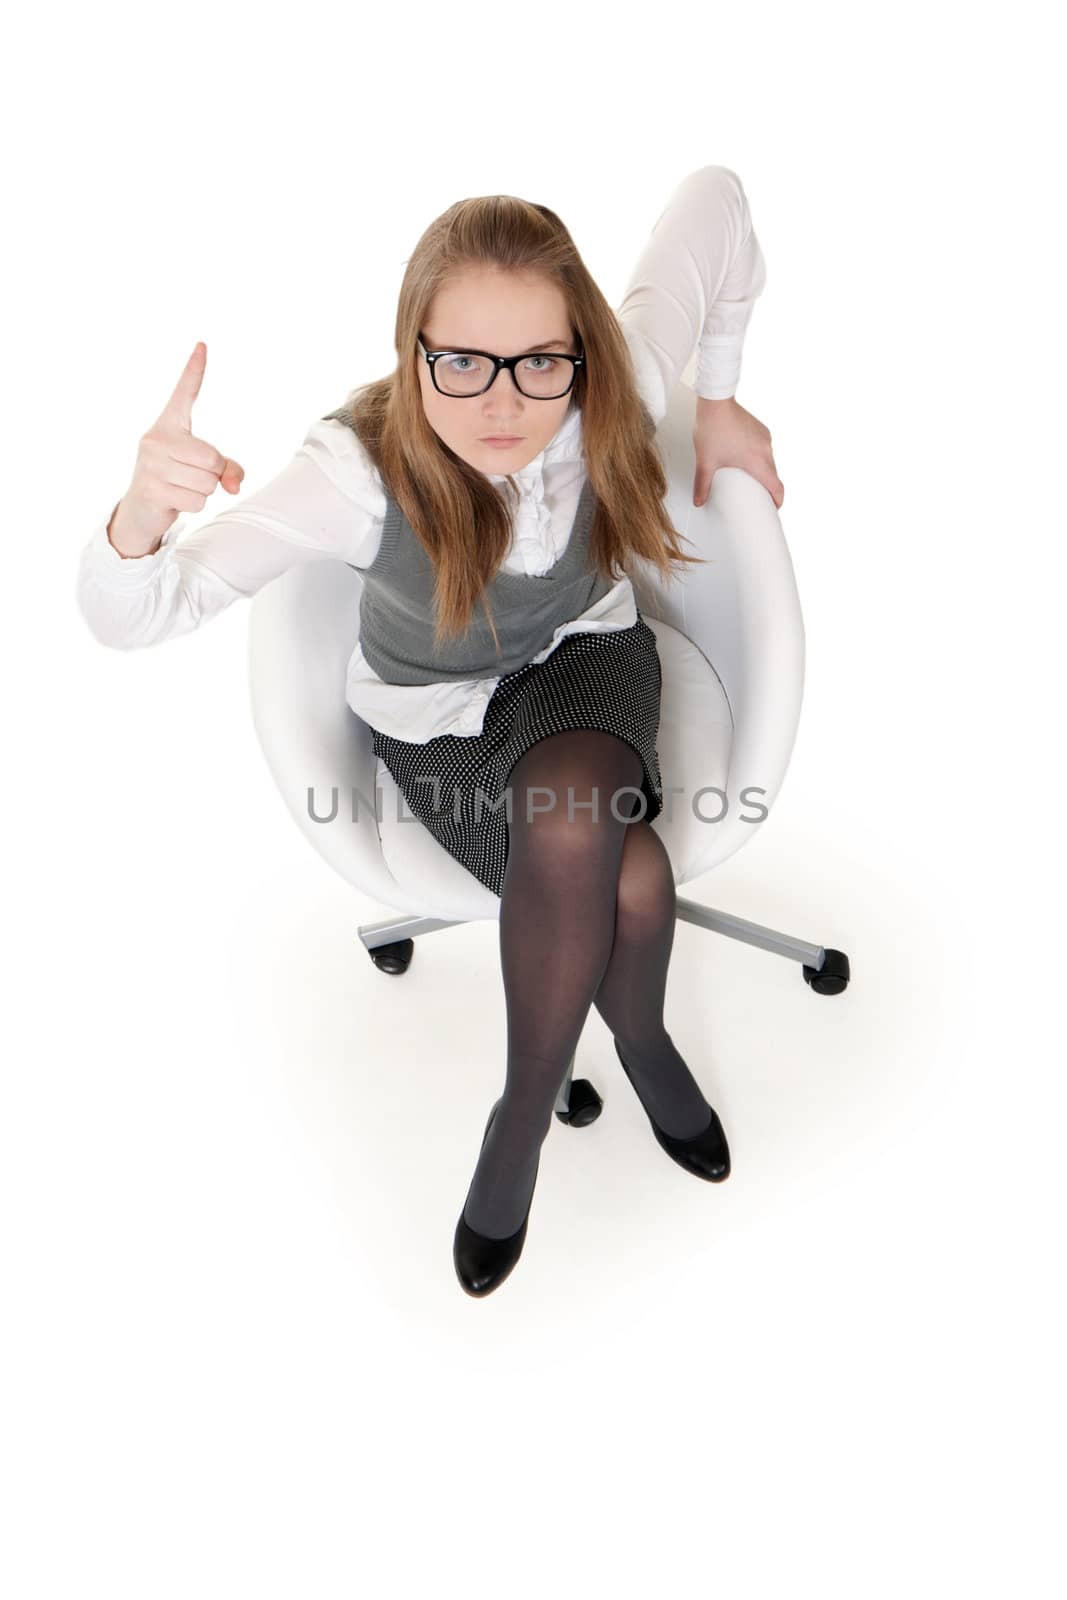 strong girl sitting in an armchair on a white background